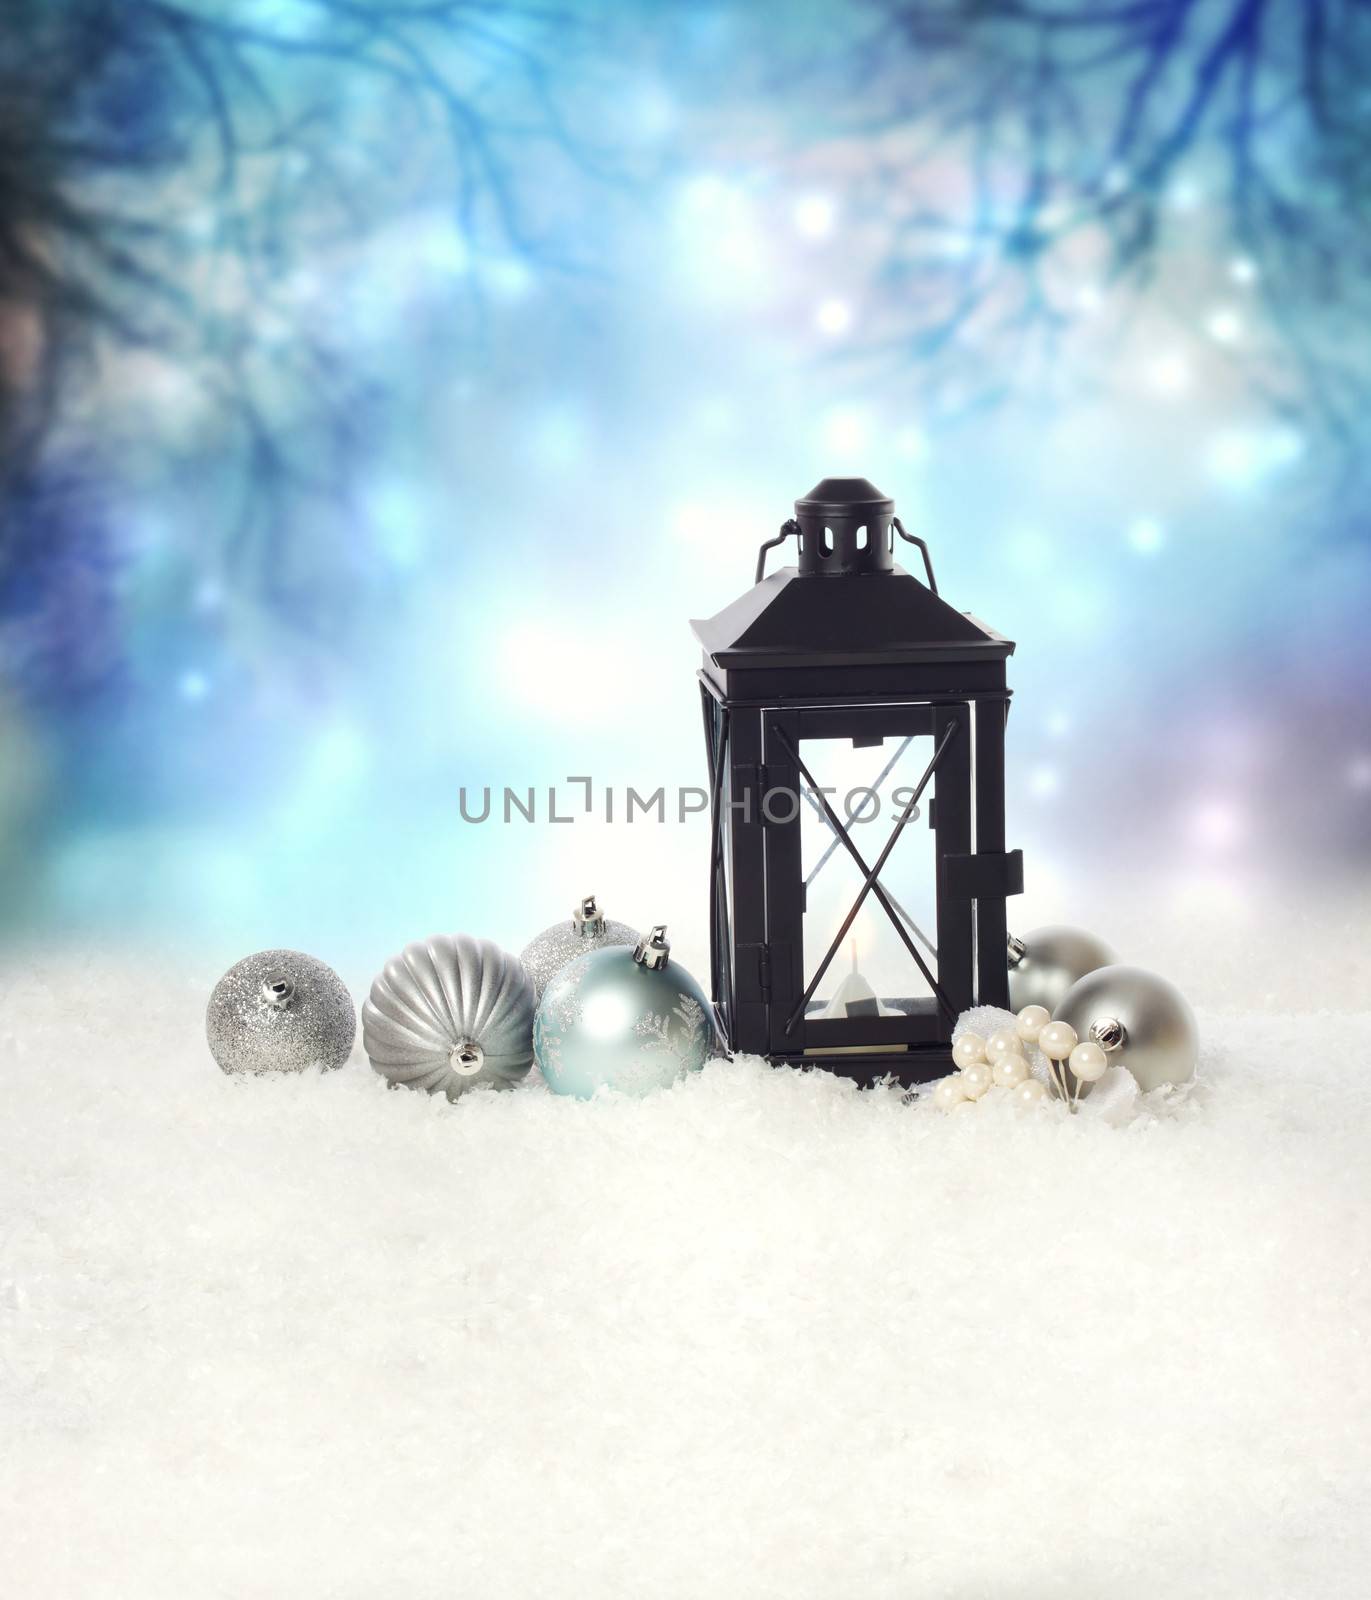 Christmas lantern and ornaments on the snow in a blue shinning night